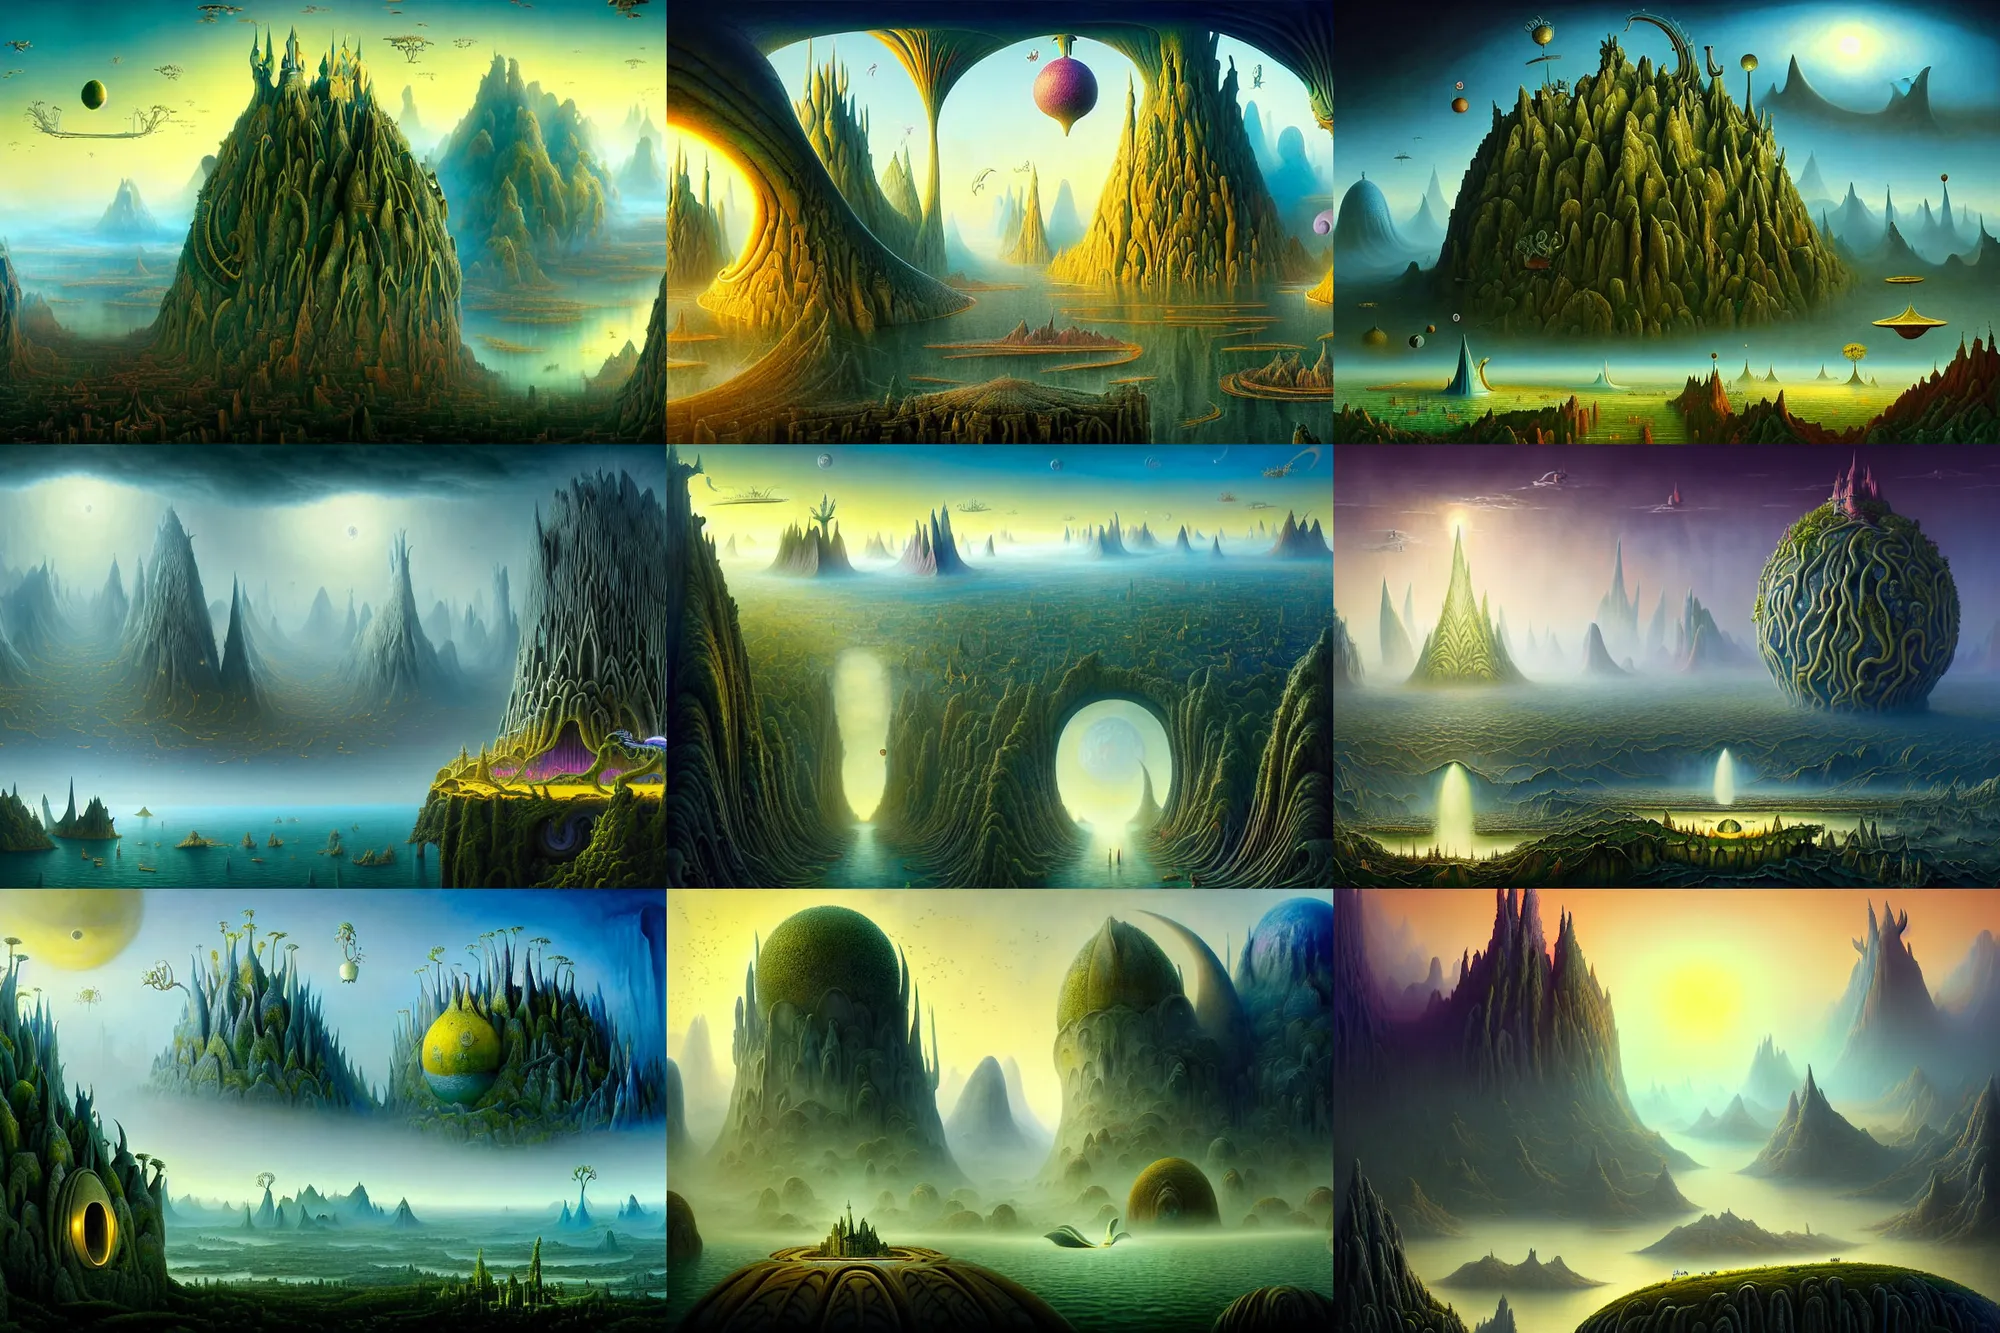 Prompt: a beguiling epic stunning beautiful and insanely detailed matte painting of alien dream worlds with surreal architecture designed by Heironymous Bosch, mega structures inspired by Heironymous Bosch's Garden of Earthly Delights, vast surreal landscape and horizon by Asher Durand and Gerald Brom and Cyril Rolando and Oh Ji Hoon and Tyler Edlin, masterpiece!!!, grand!, imaginative!!!, whimsical!!, epic scale, intricate details, sense of awe, elite, wonder, insanely complex, masterful composition!!!, sharp focus, fantasy realism, dramatic lighting